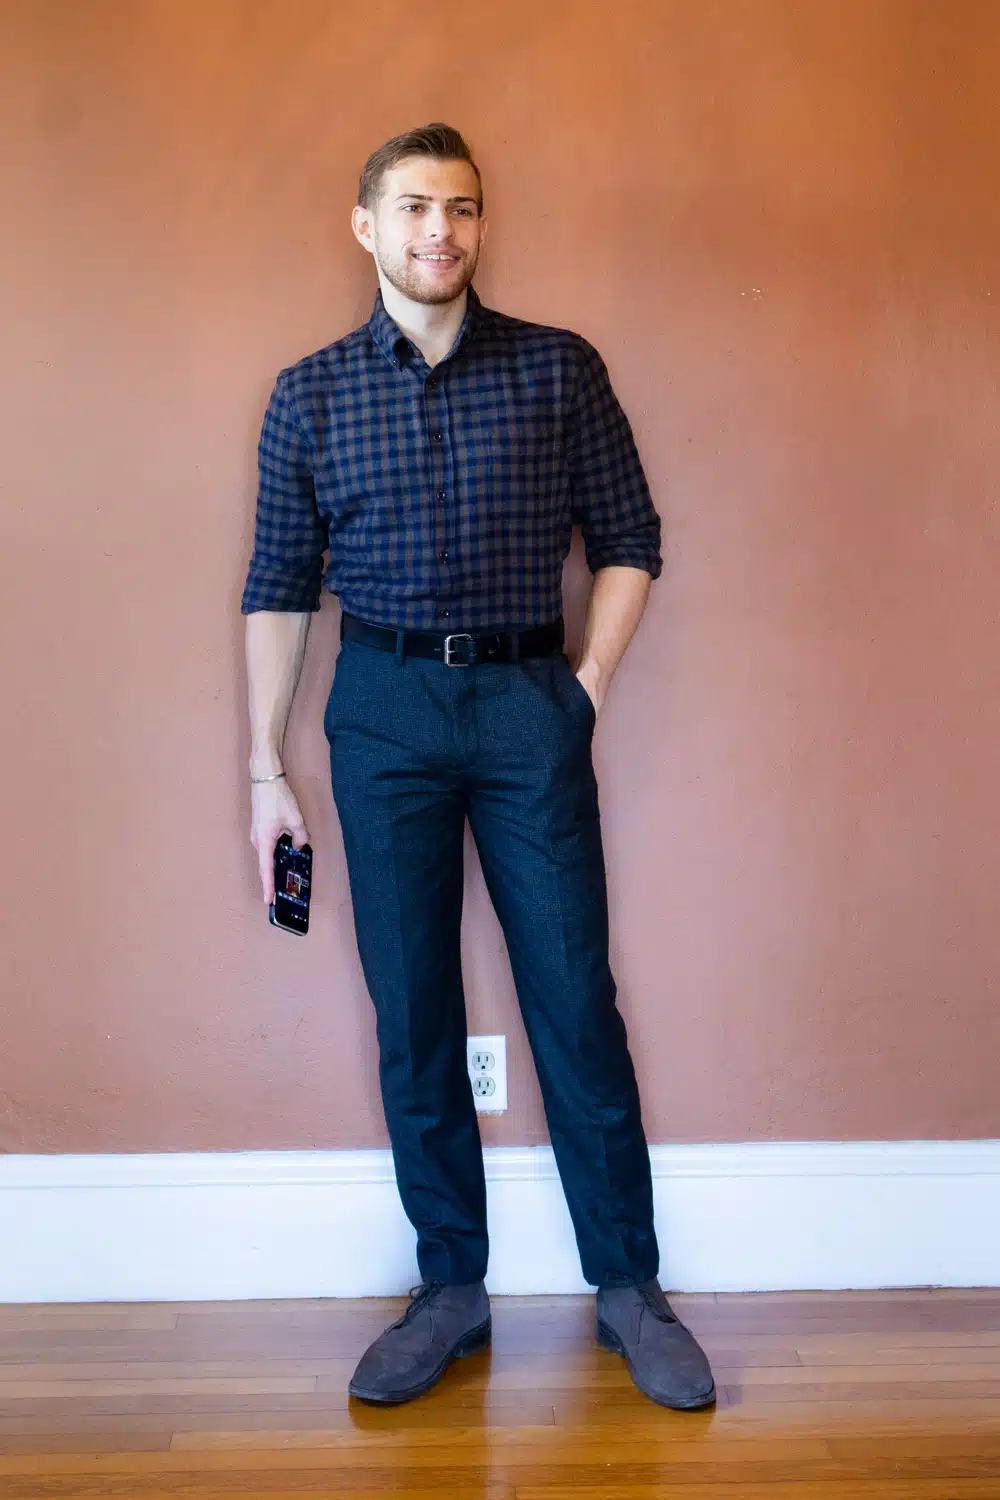 Flannel shirt and dress pants